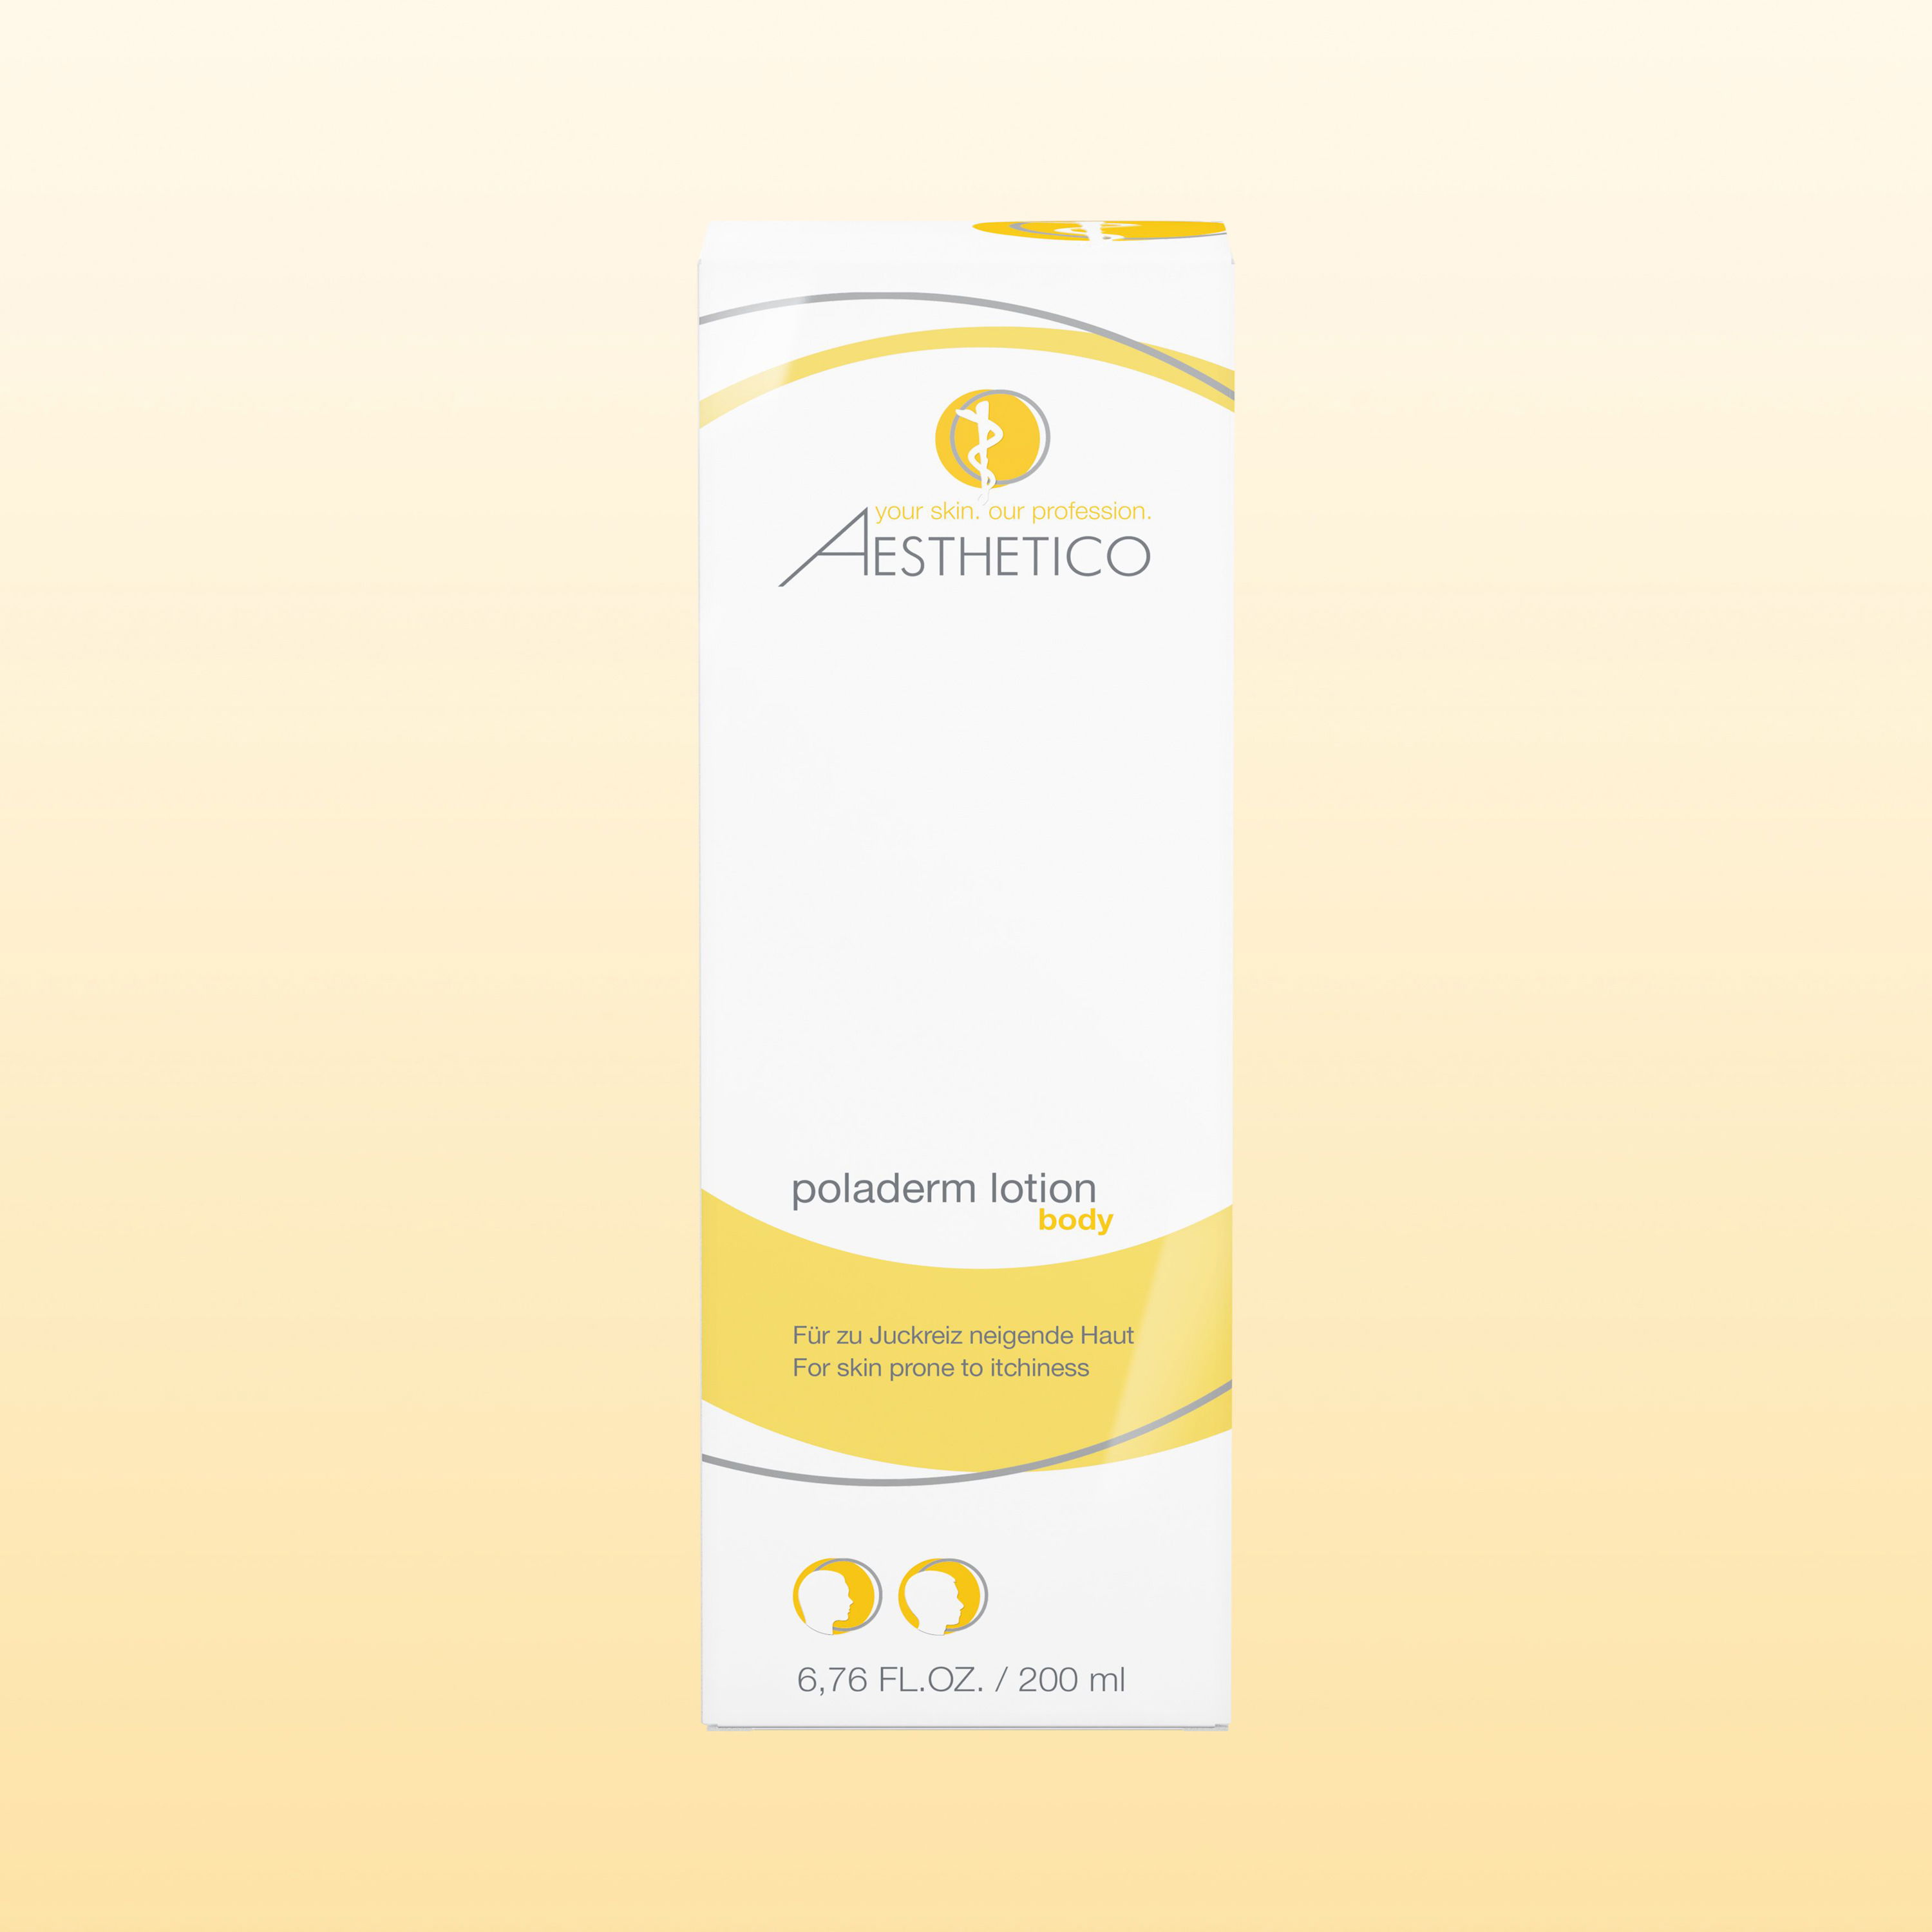 Umverpackung AESTHETICO poladerm lotion, 200 ml